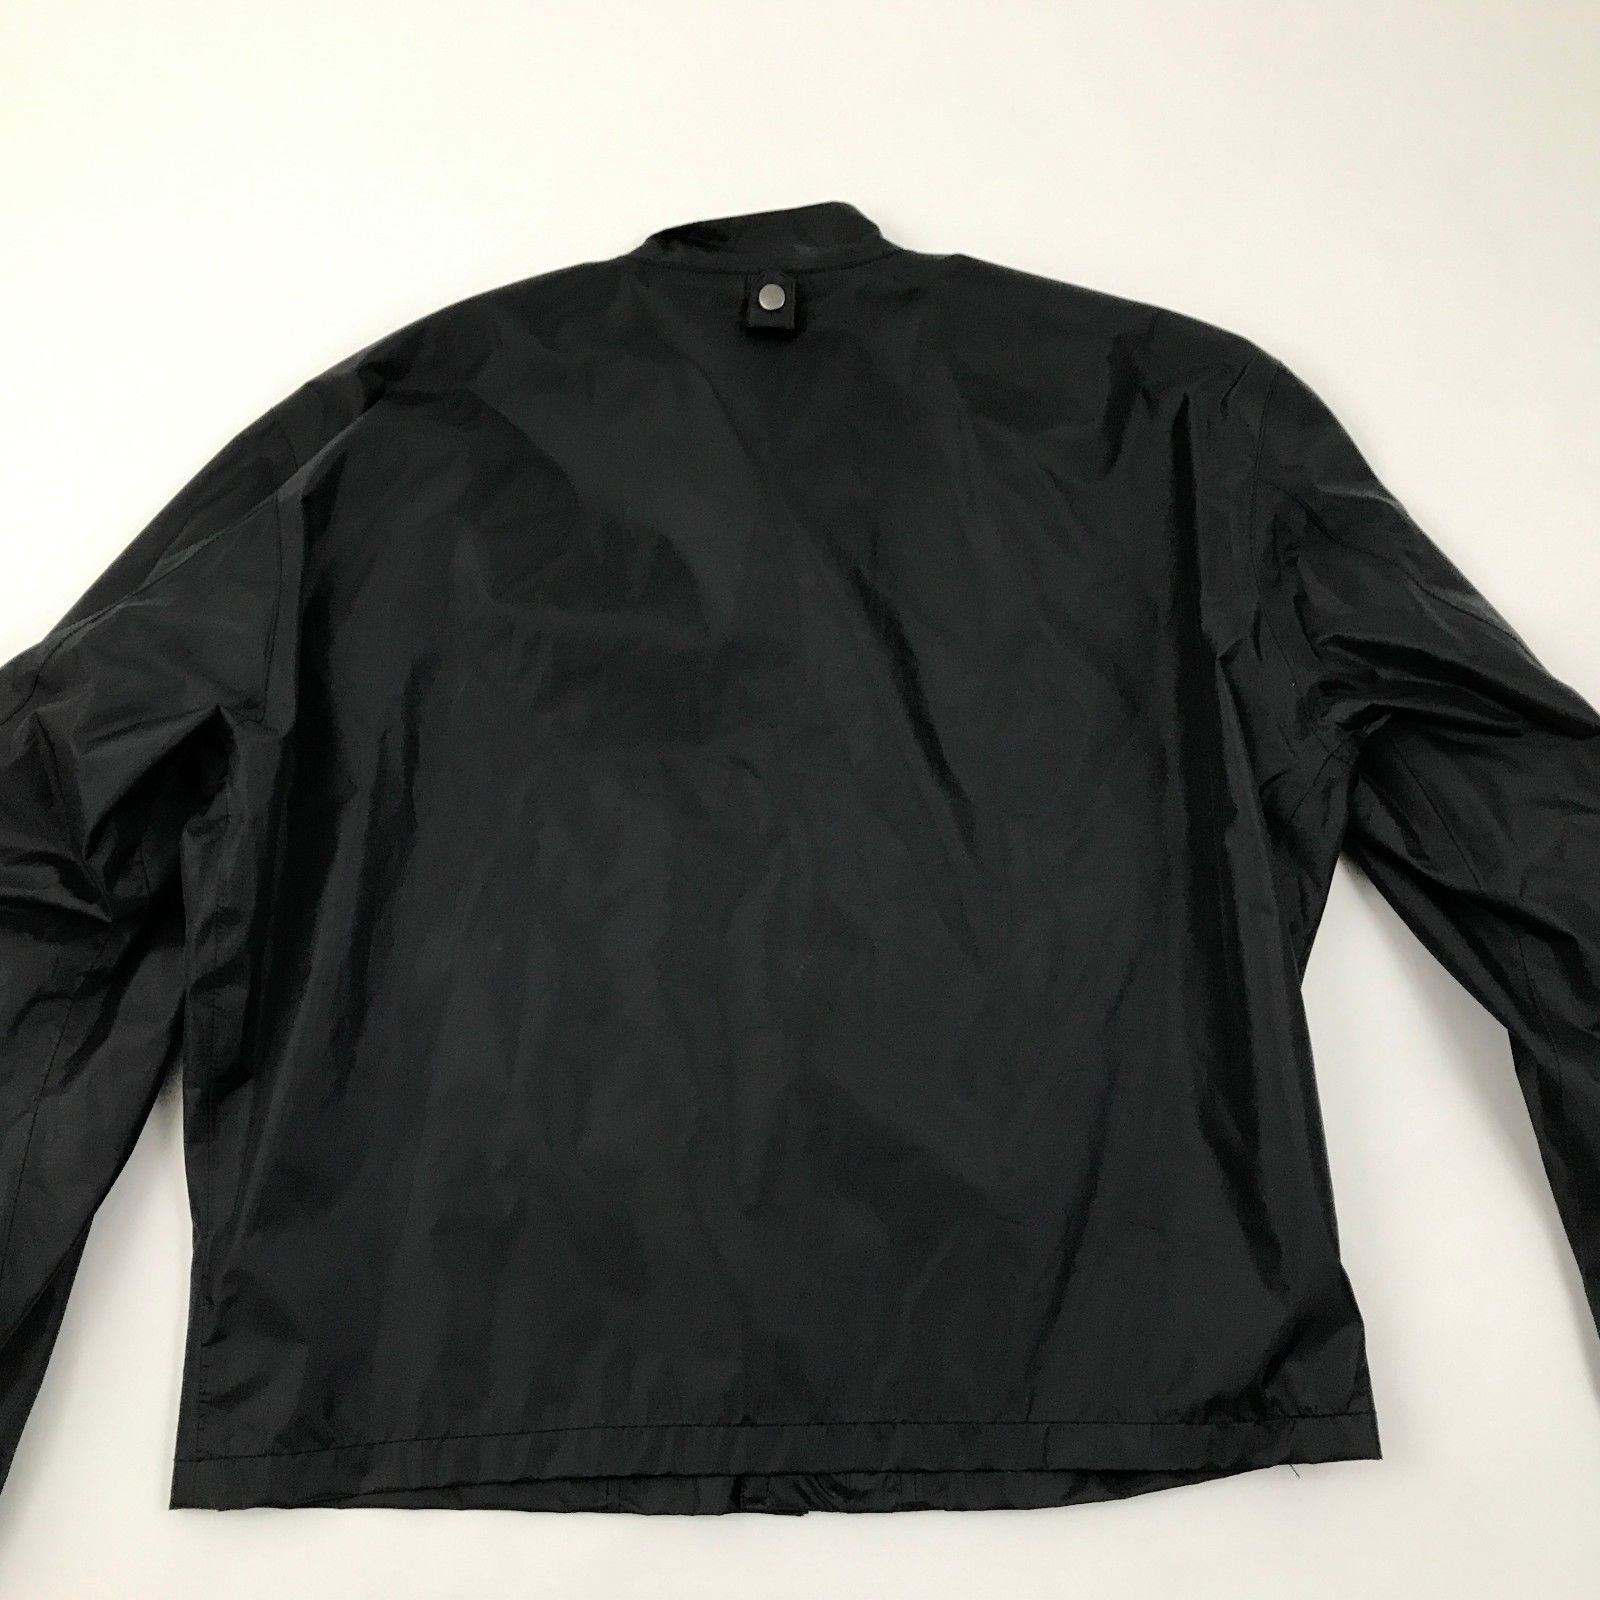 Joe Rocket Motorcycle Jacket Replacement Liner Black Soft Shell Zip Out ...